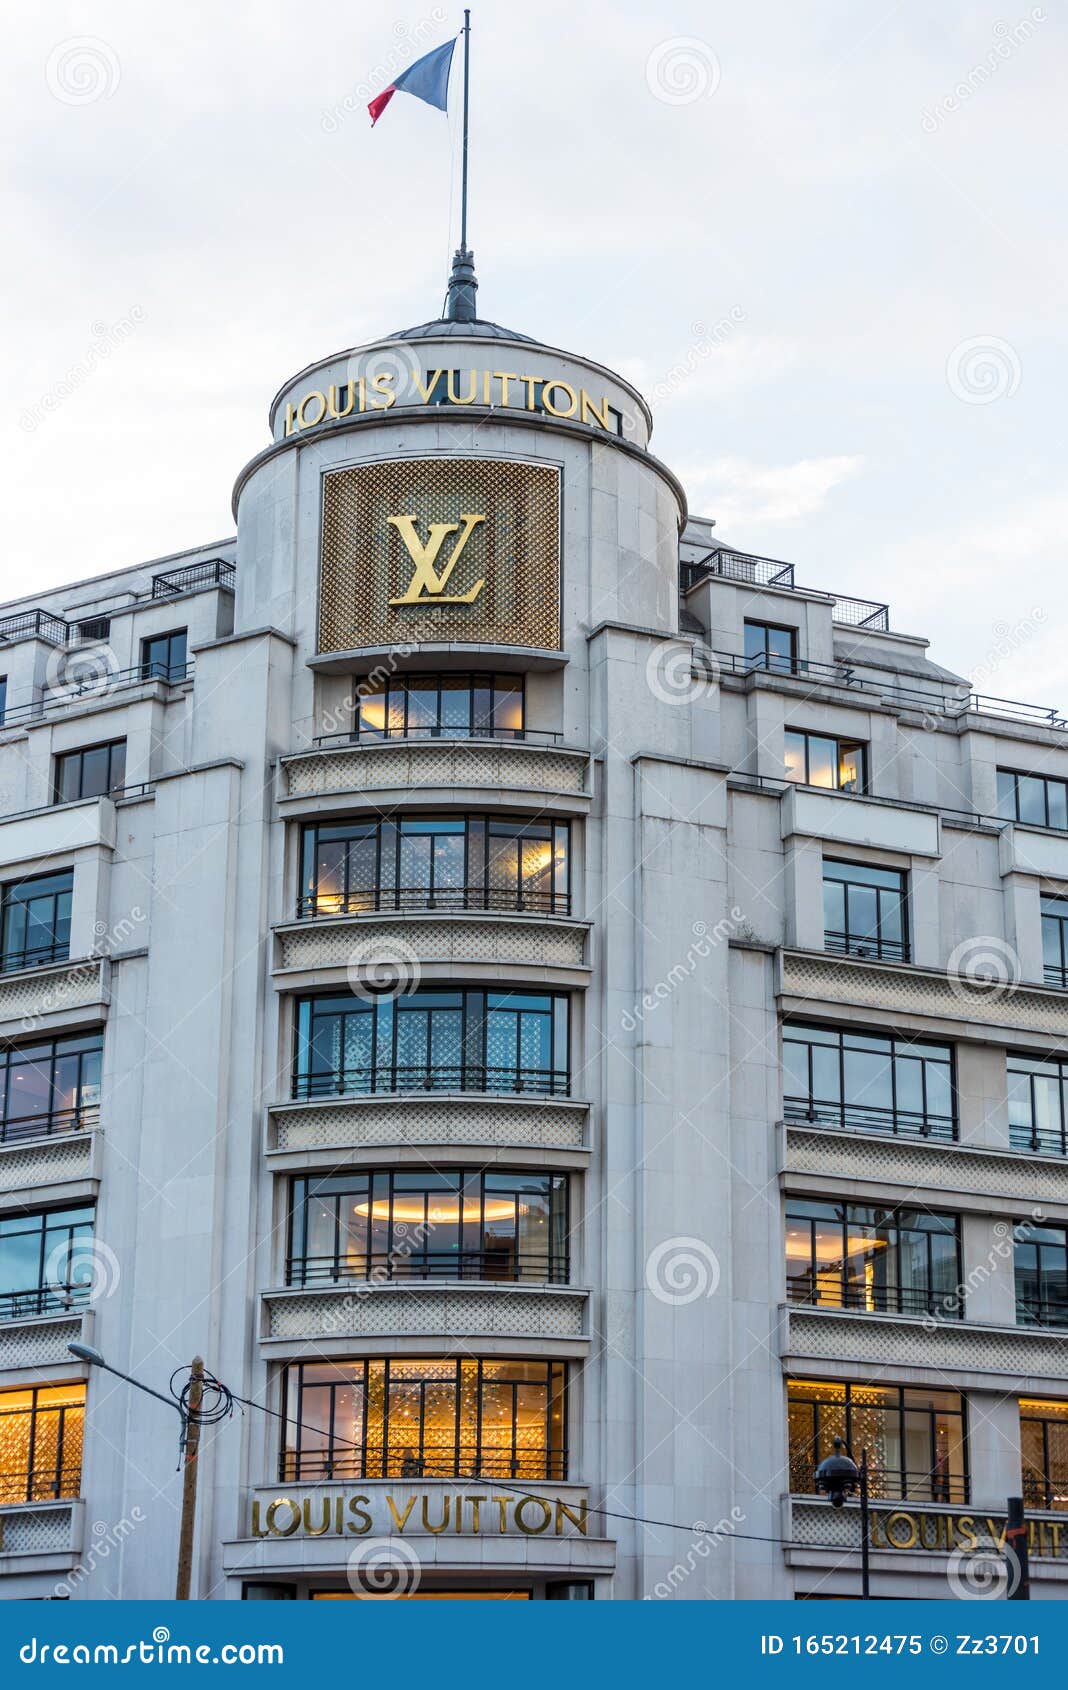 Street View of Champs-Elysees Avenue with Building LOUIS VUITTON